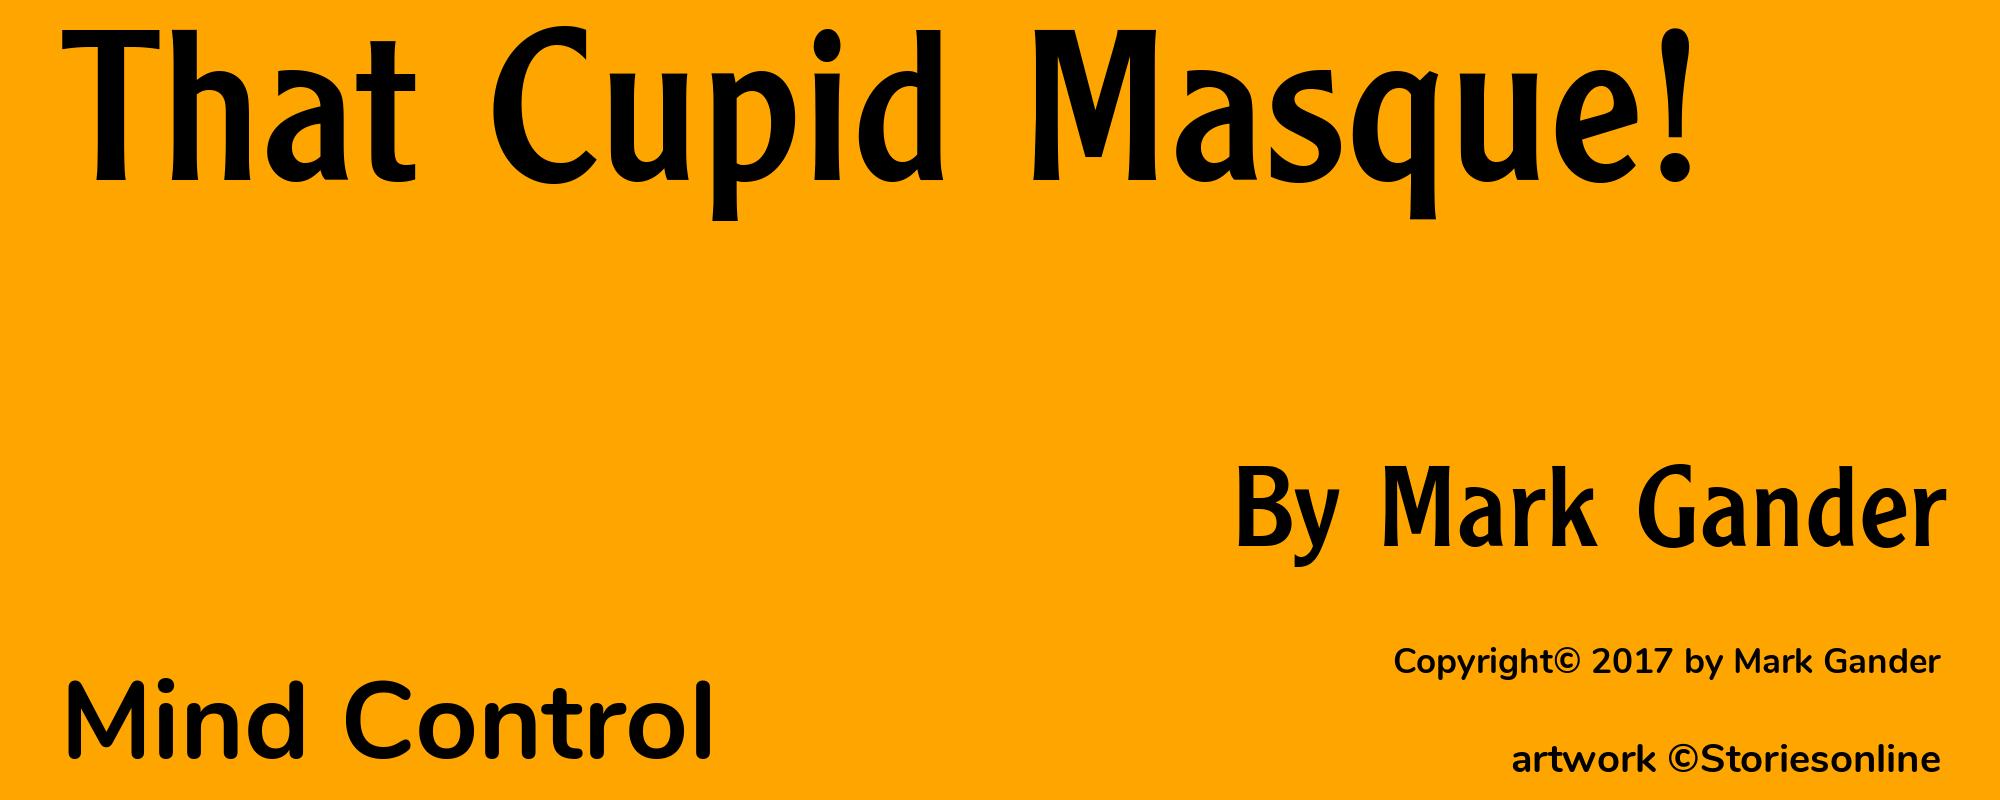 That Cupid Masque! - Cover